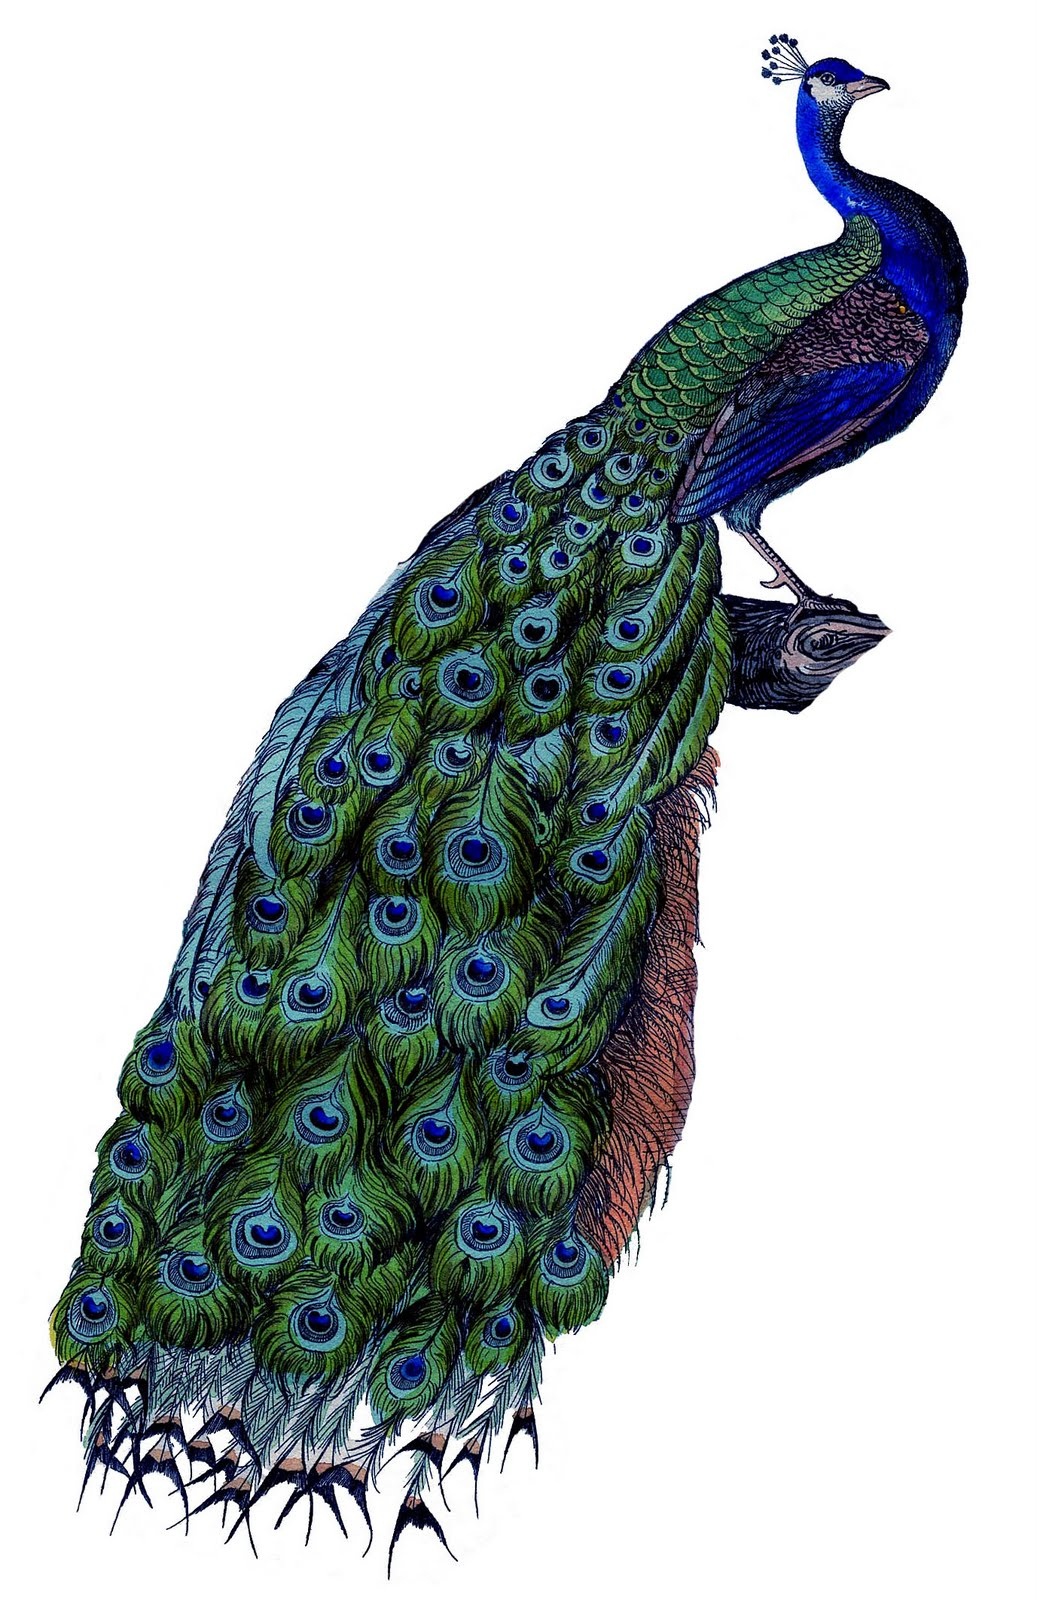 Instant Art Printable Download - Fabulous Colorful Peacock - The - Free Printable Peacock Pictures